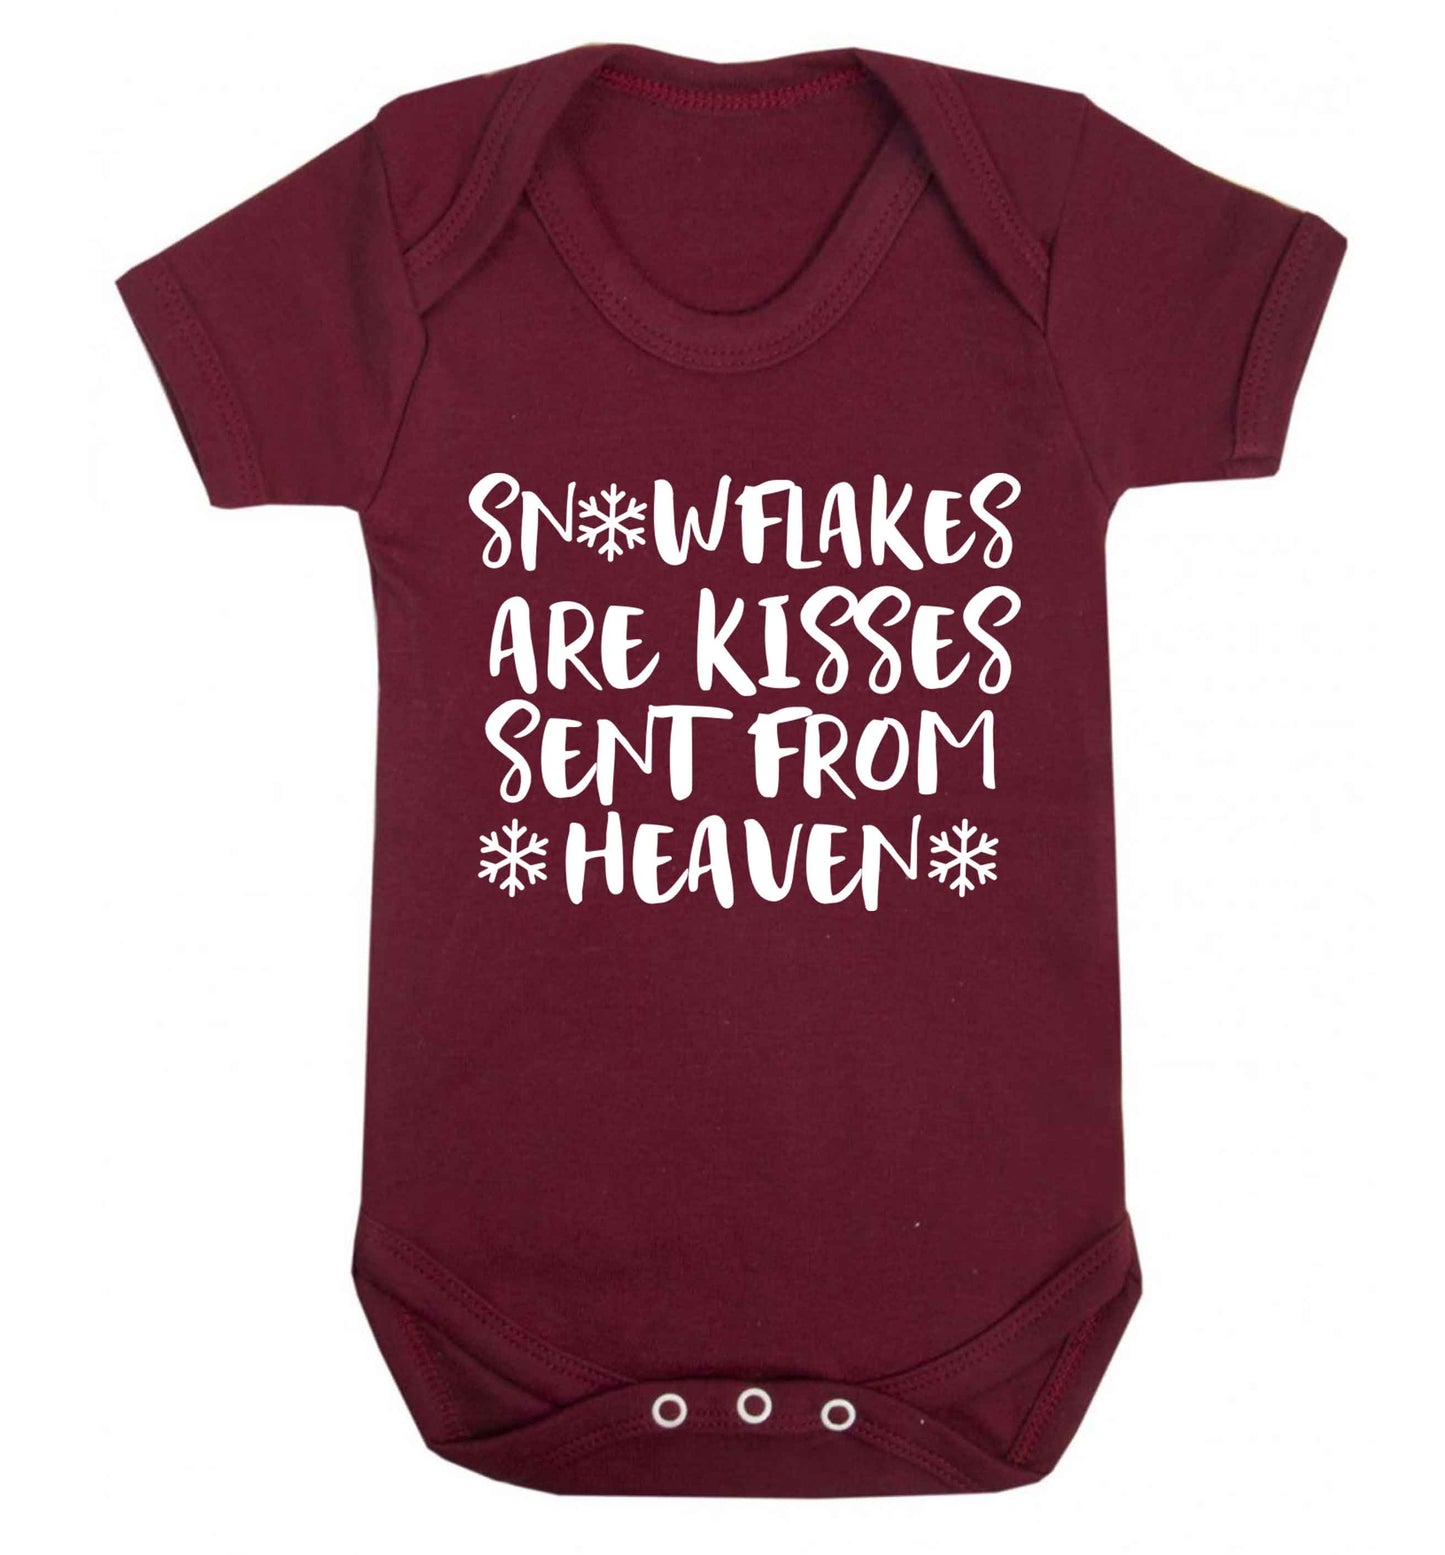 Snowflakes are kisses sent from heaven Baby Vest maroon 18-24 months